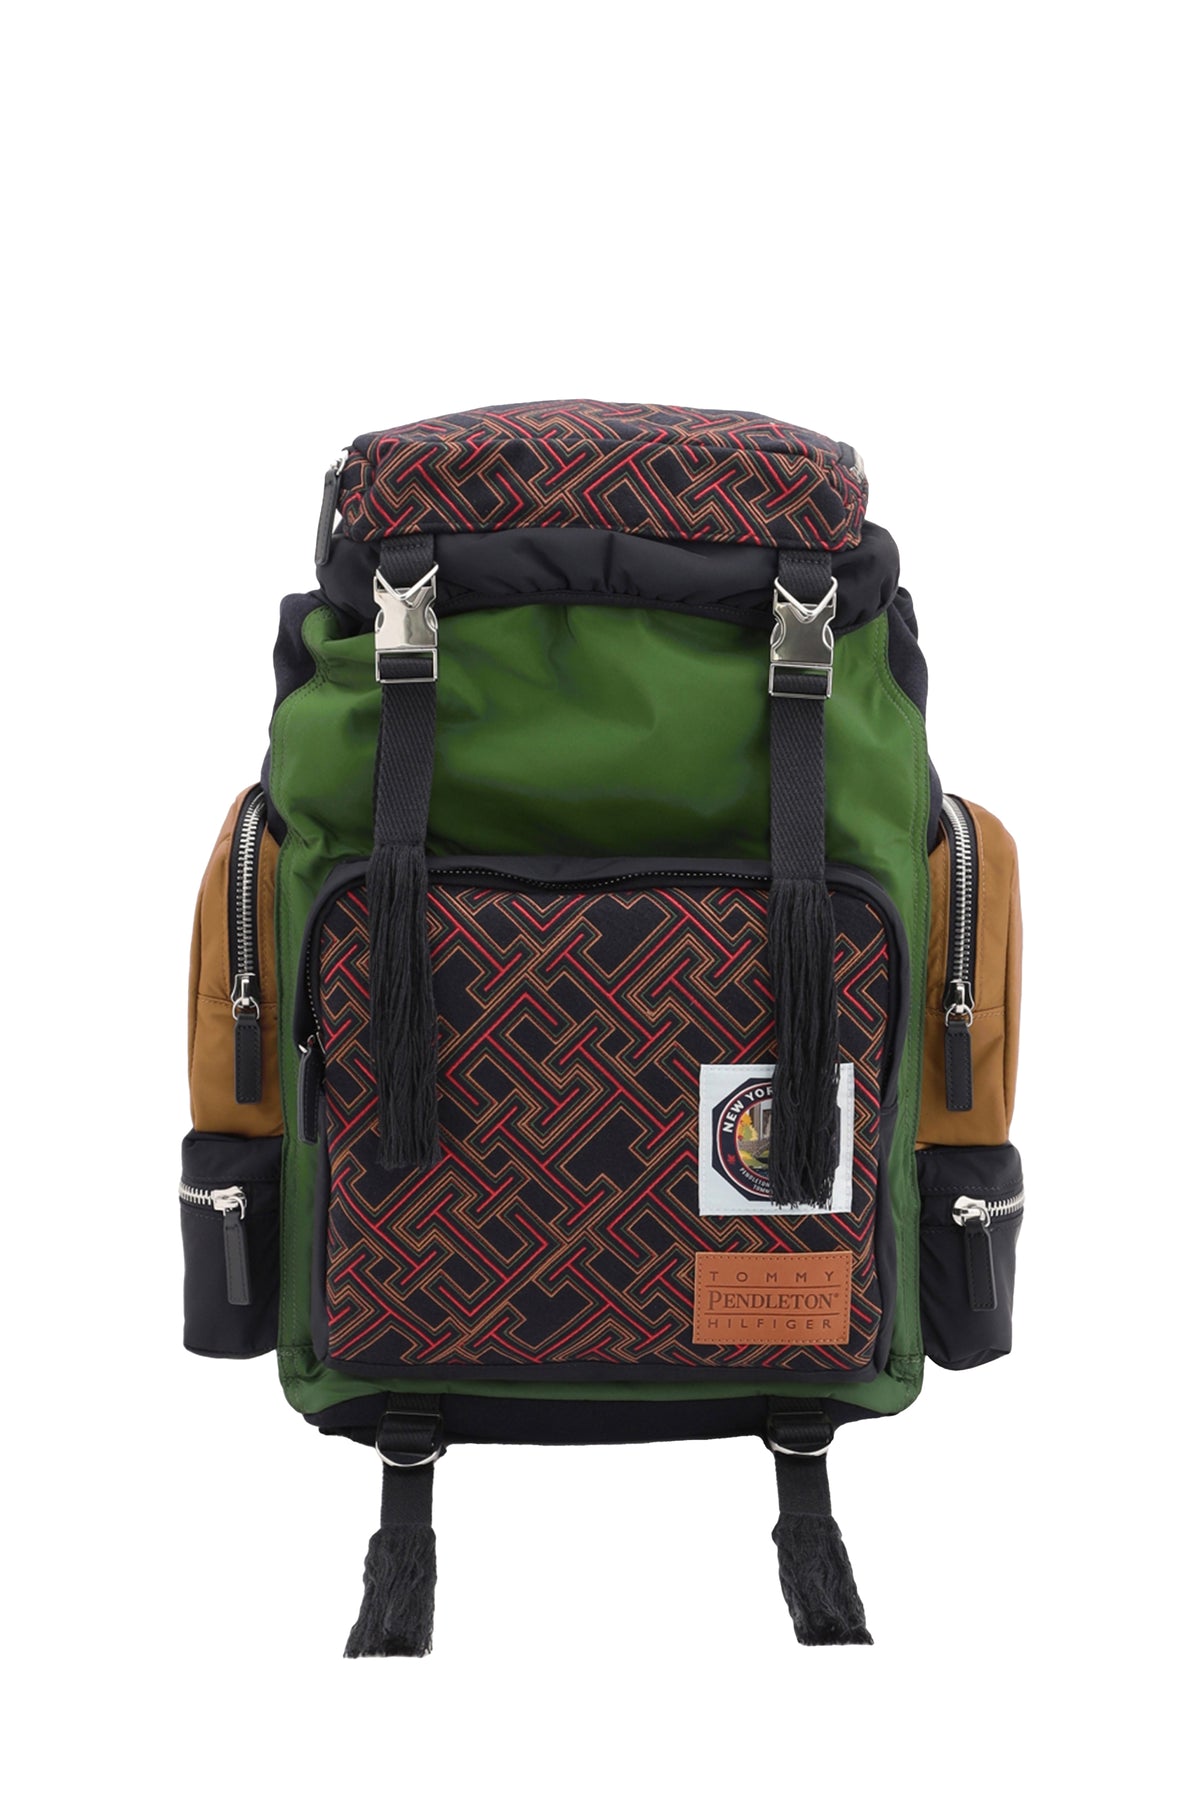 TOMMY HILFIGER x PENDLETON TH X P BACKPACK / NY STP MGM